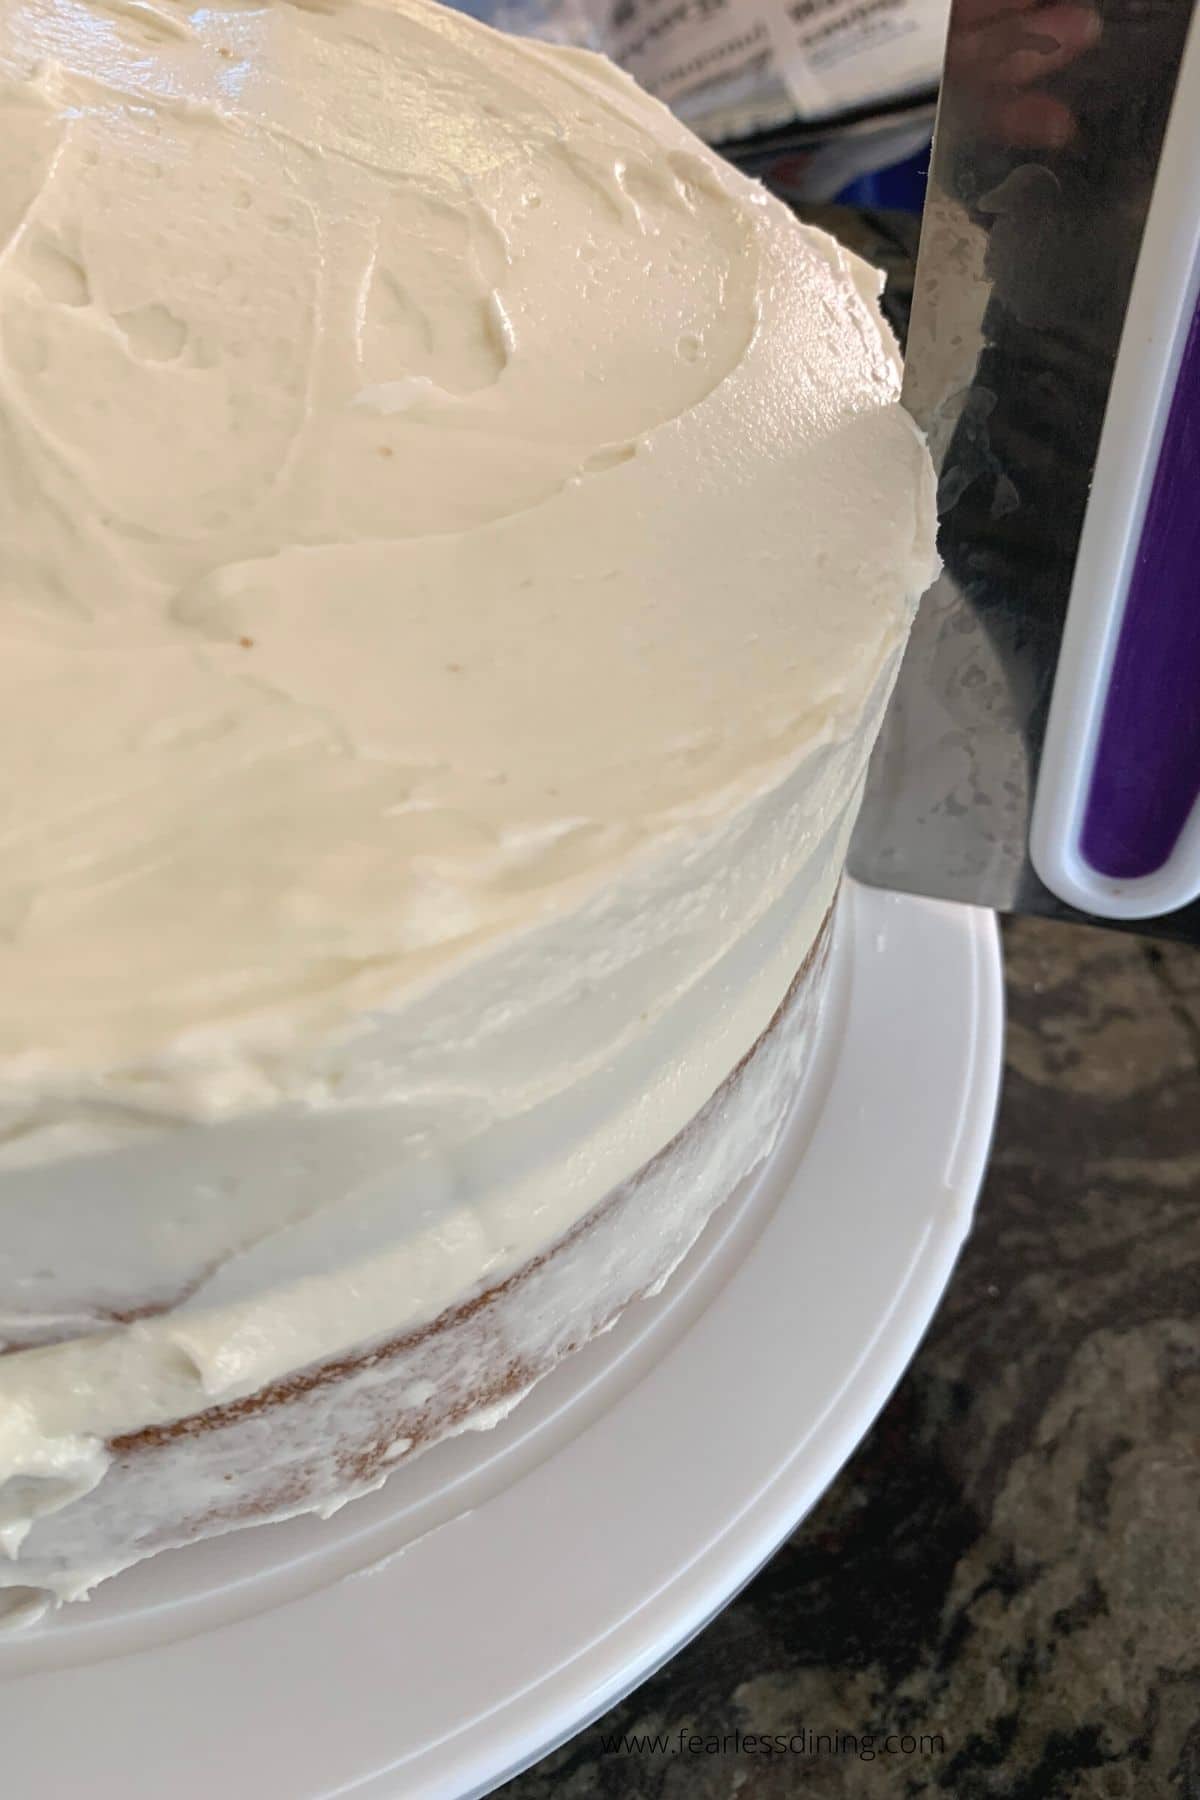 Using a scraper to scrape frosting from the side of the cake.